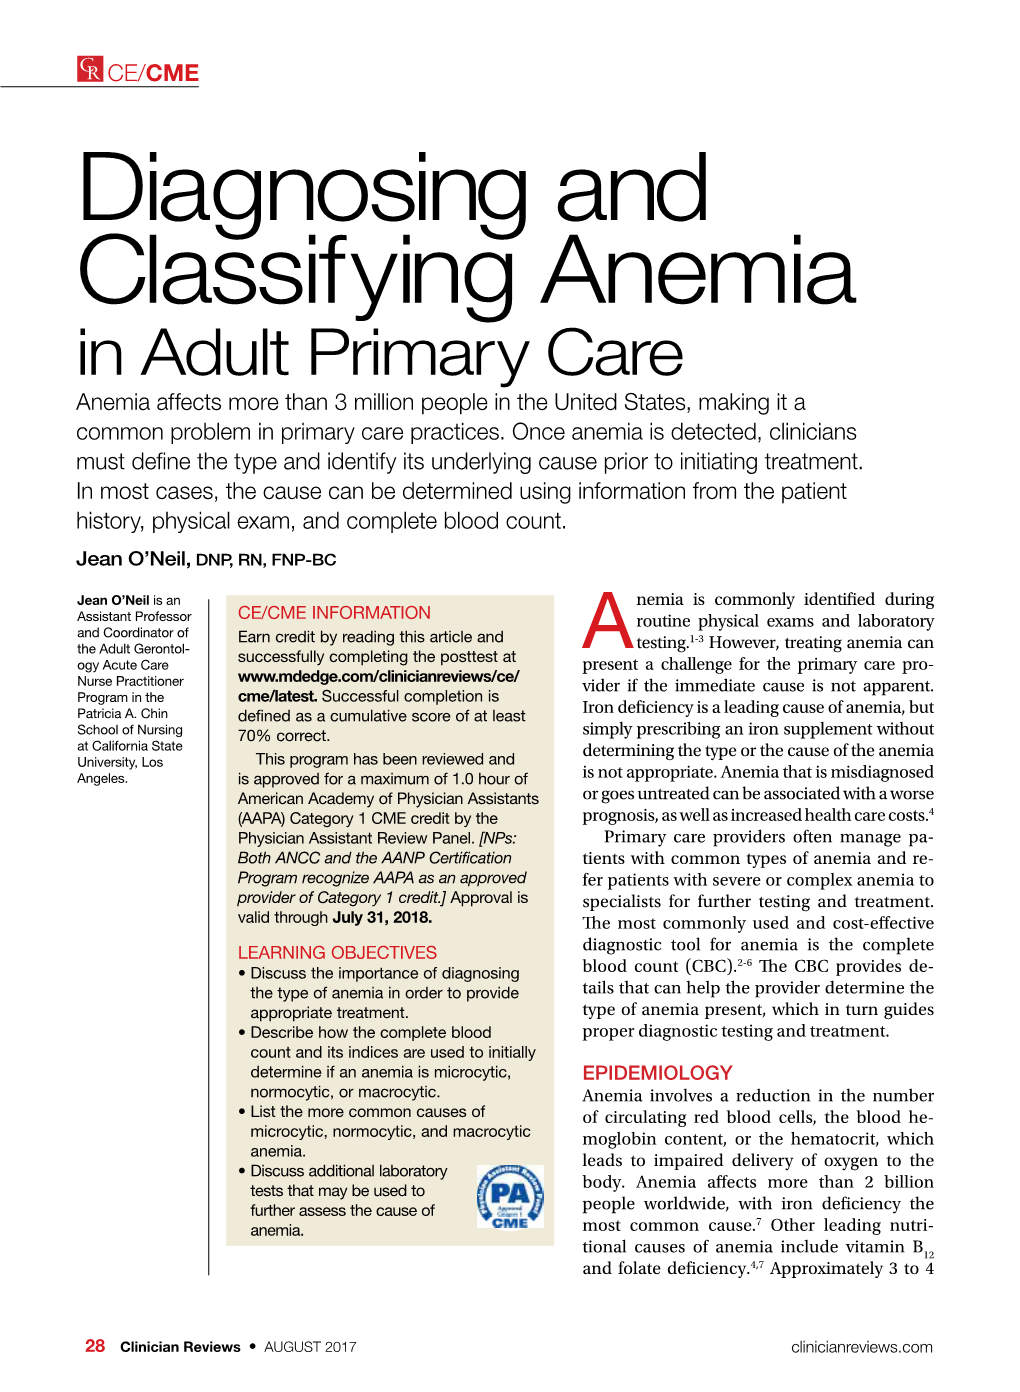 Diagnosing and Classifying Anemia